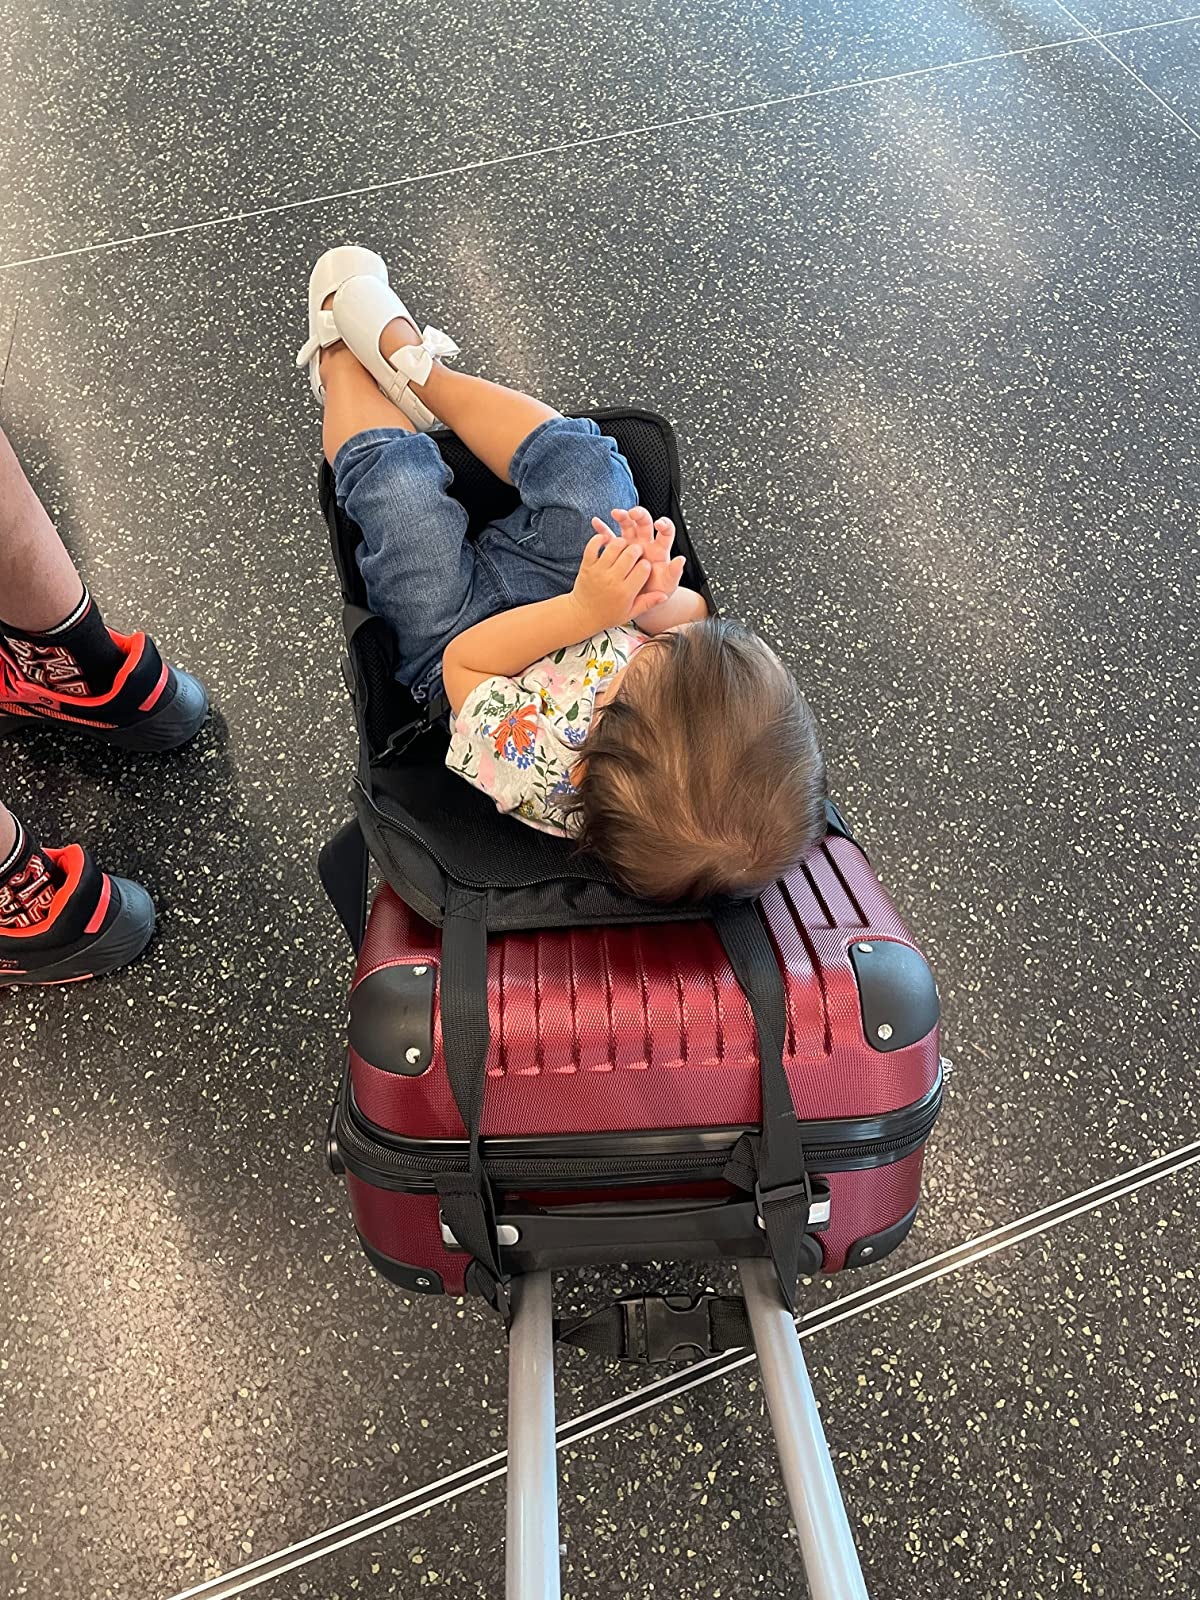 20 Helpful Family Travel Products (From A Mom of 6)